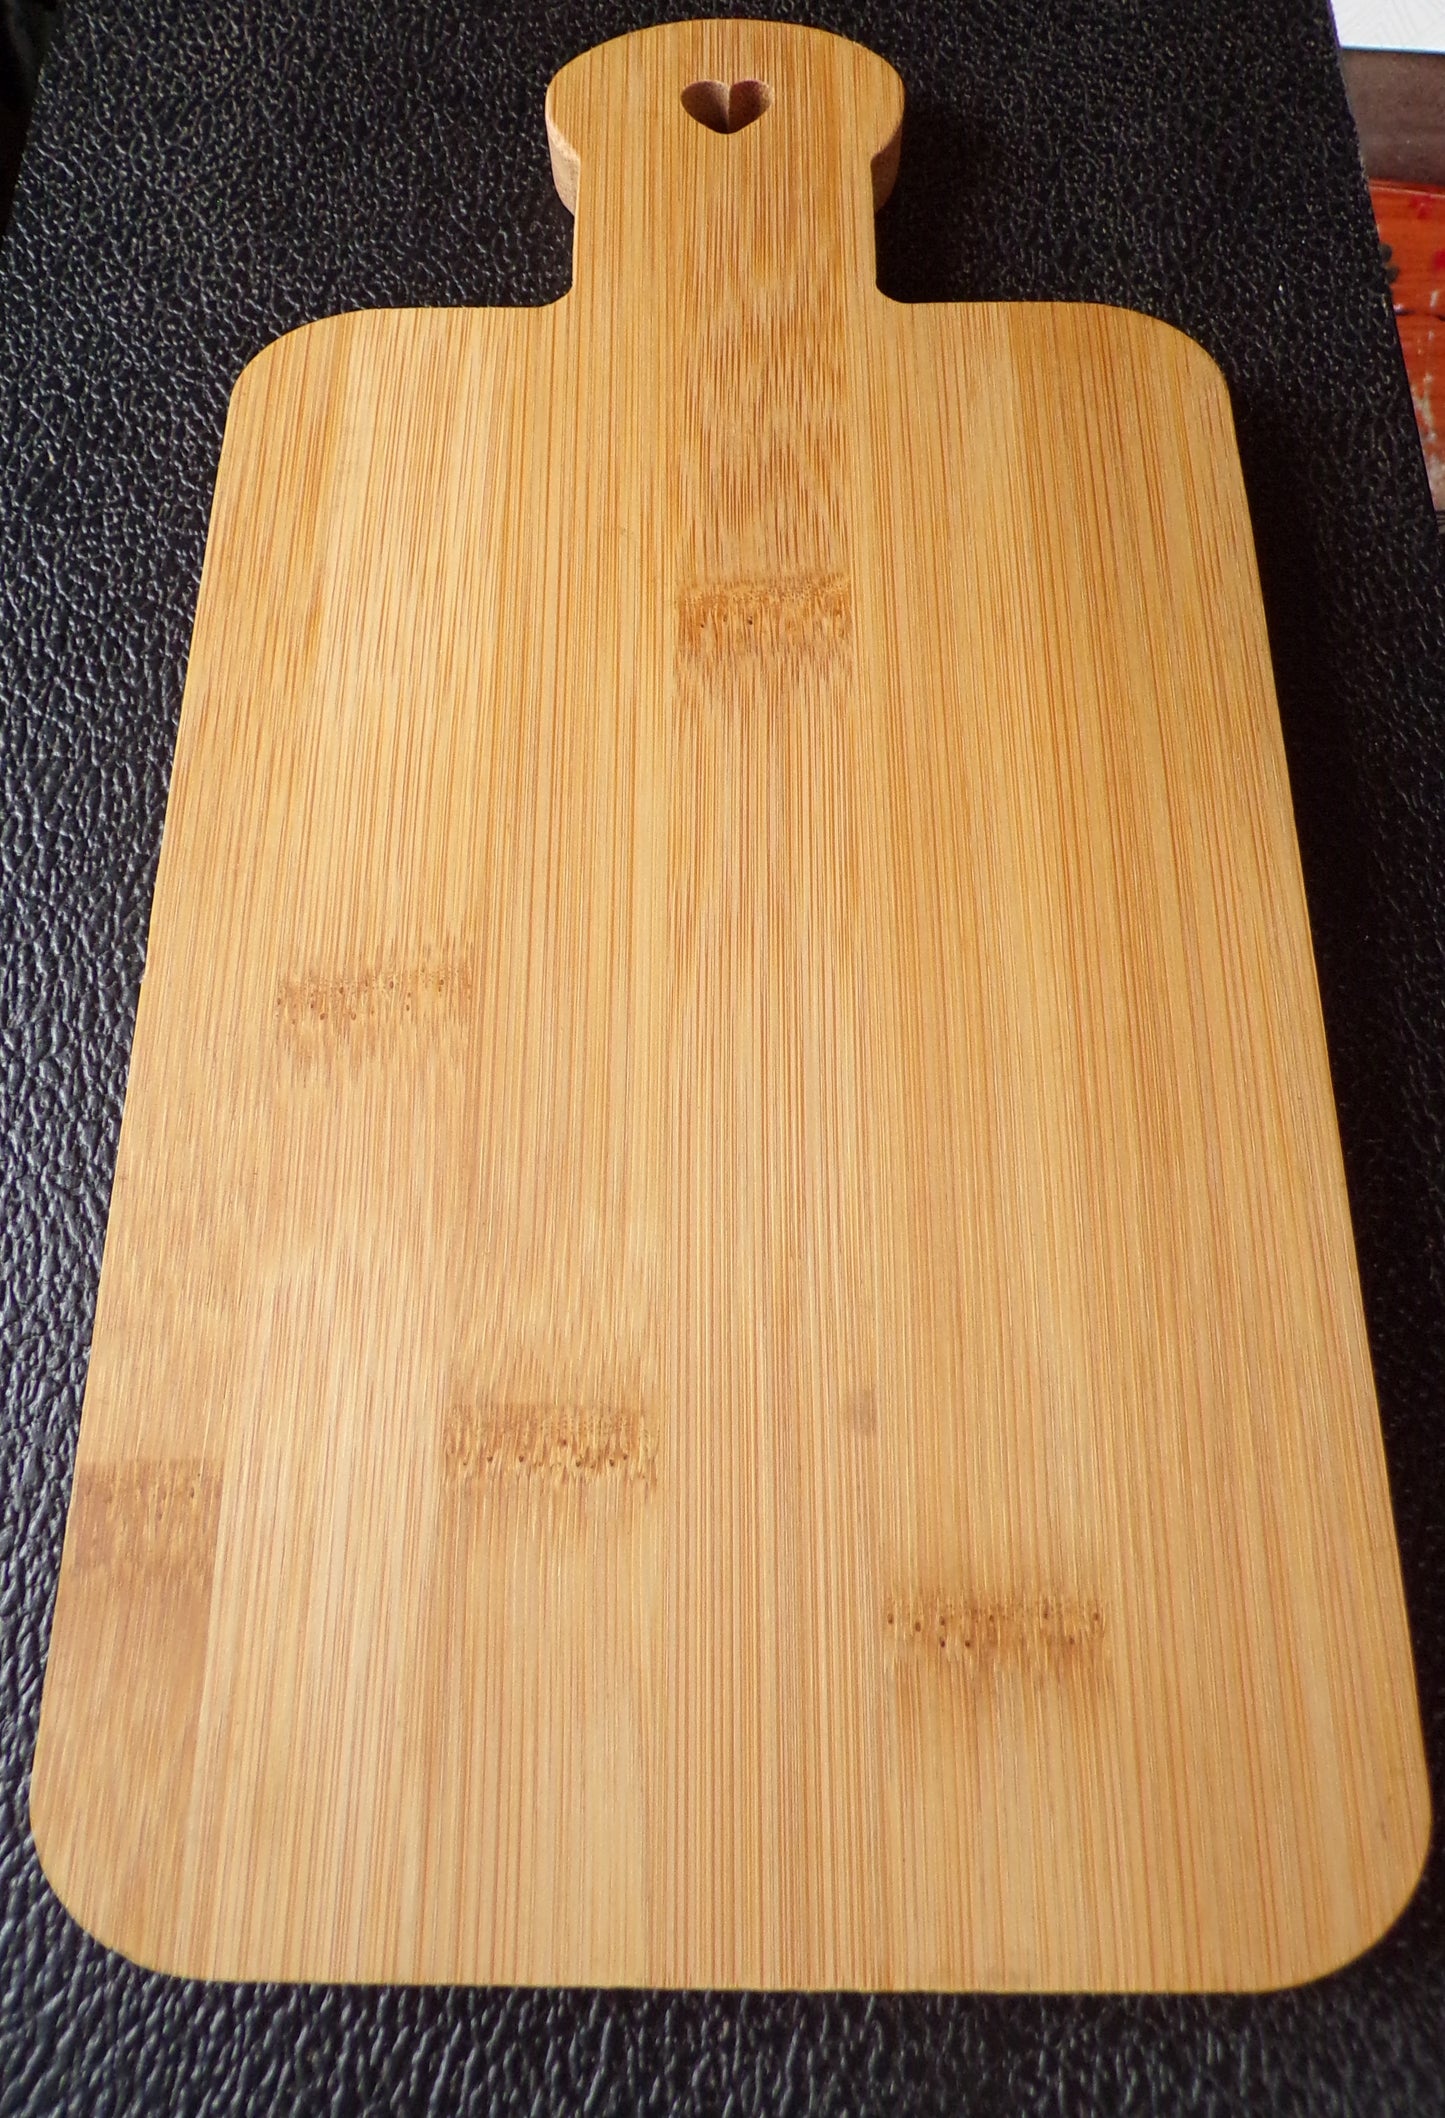 Bamboo wood Cutting board engraved with Kitchen Conversions